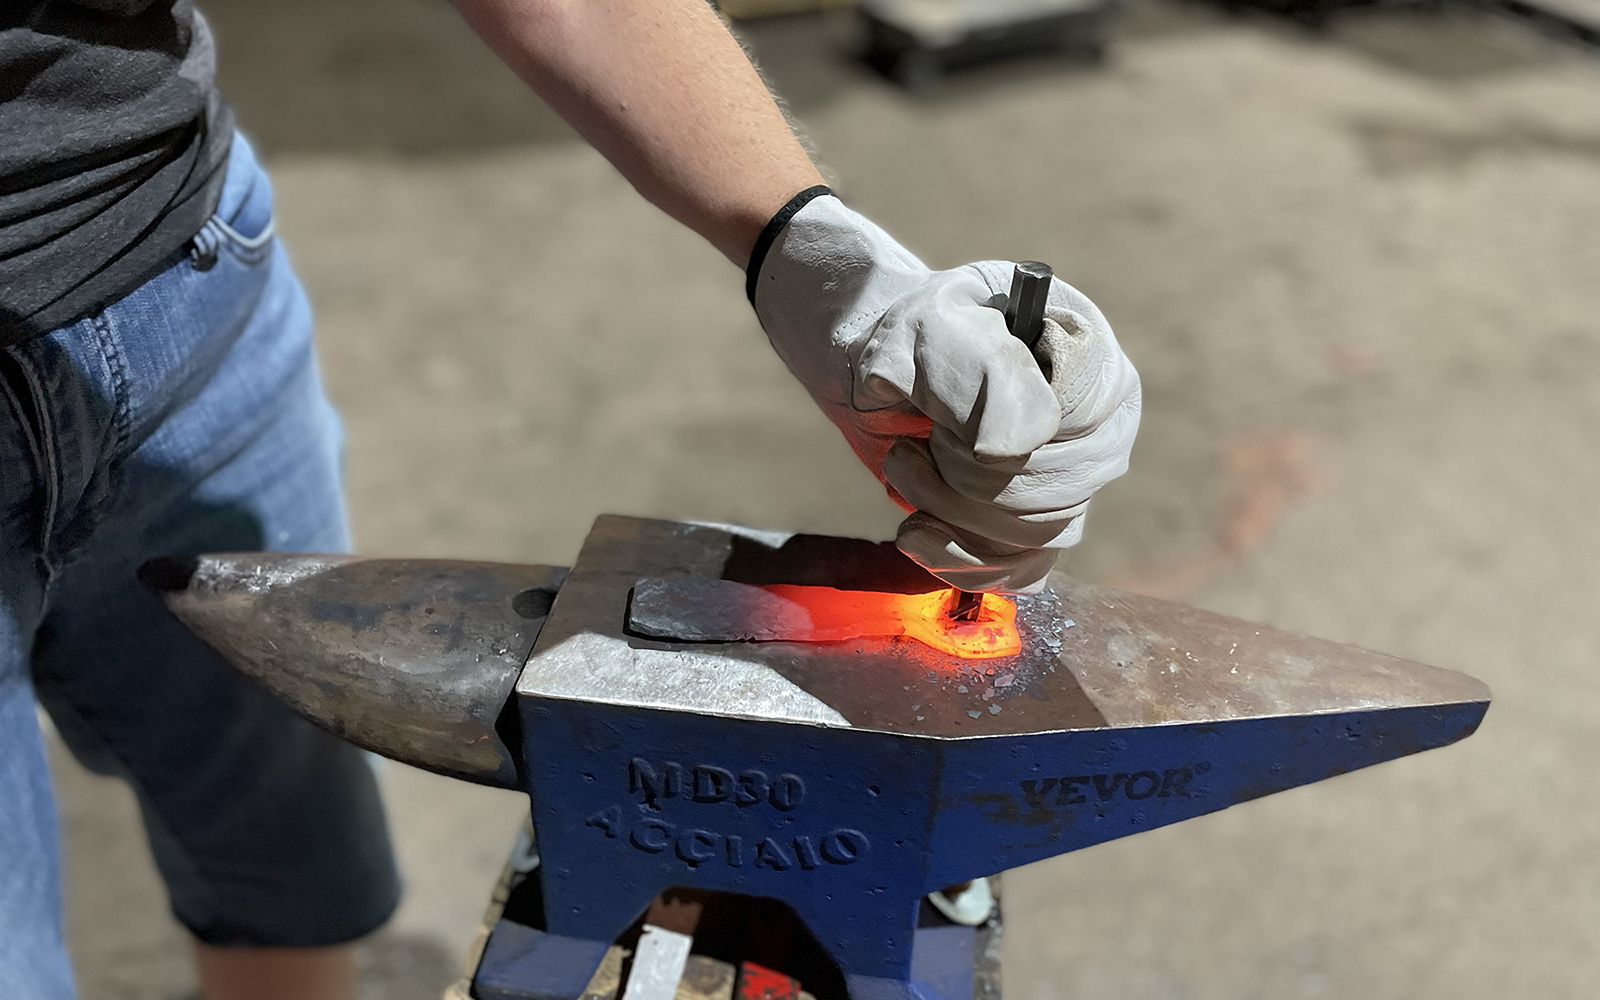 Close up image shows workshop participant hammering the chisel into red hot steel to open the bottle opener head.